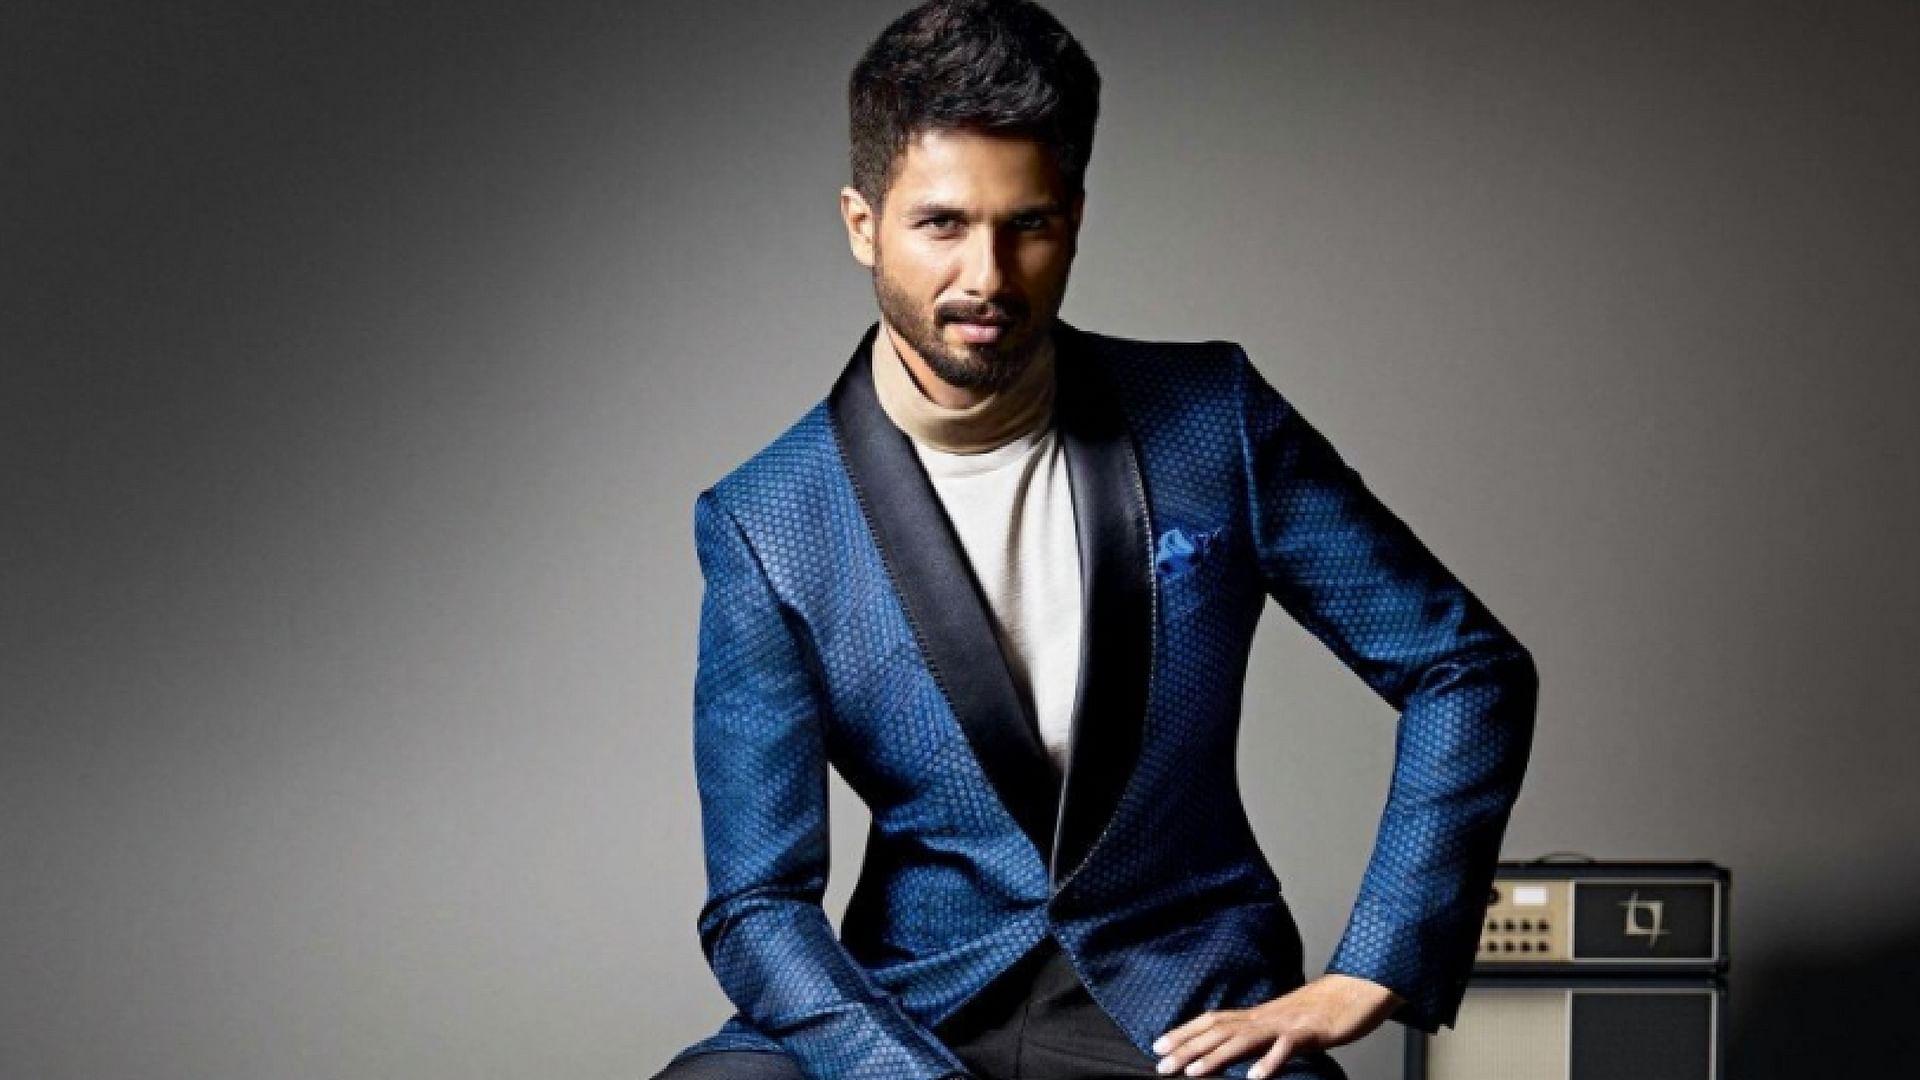 Shahid Kapoor is a hands on father to daughter Misha. (Photo Courtesy: <a href="https://twitter.com/kiranra18979104">Twitter/@kiranra18979104</a>)